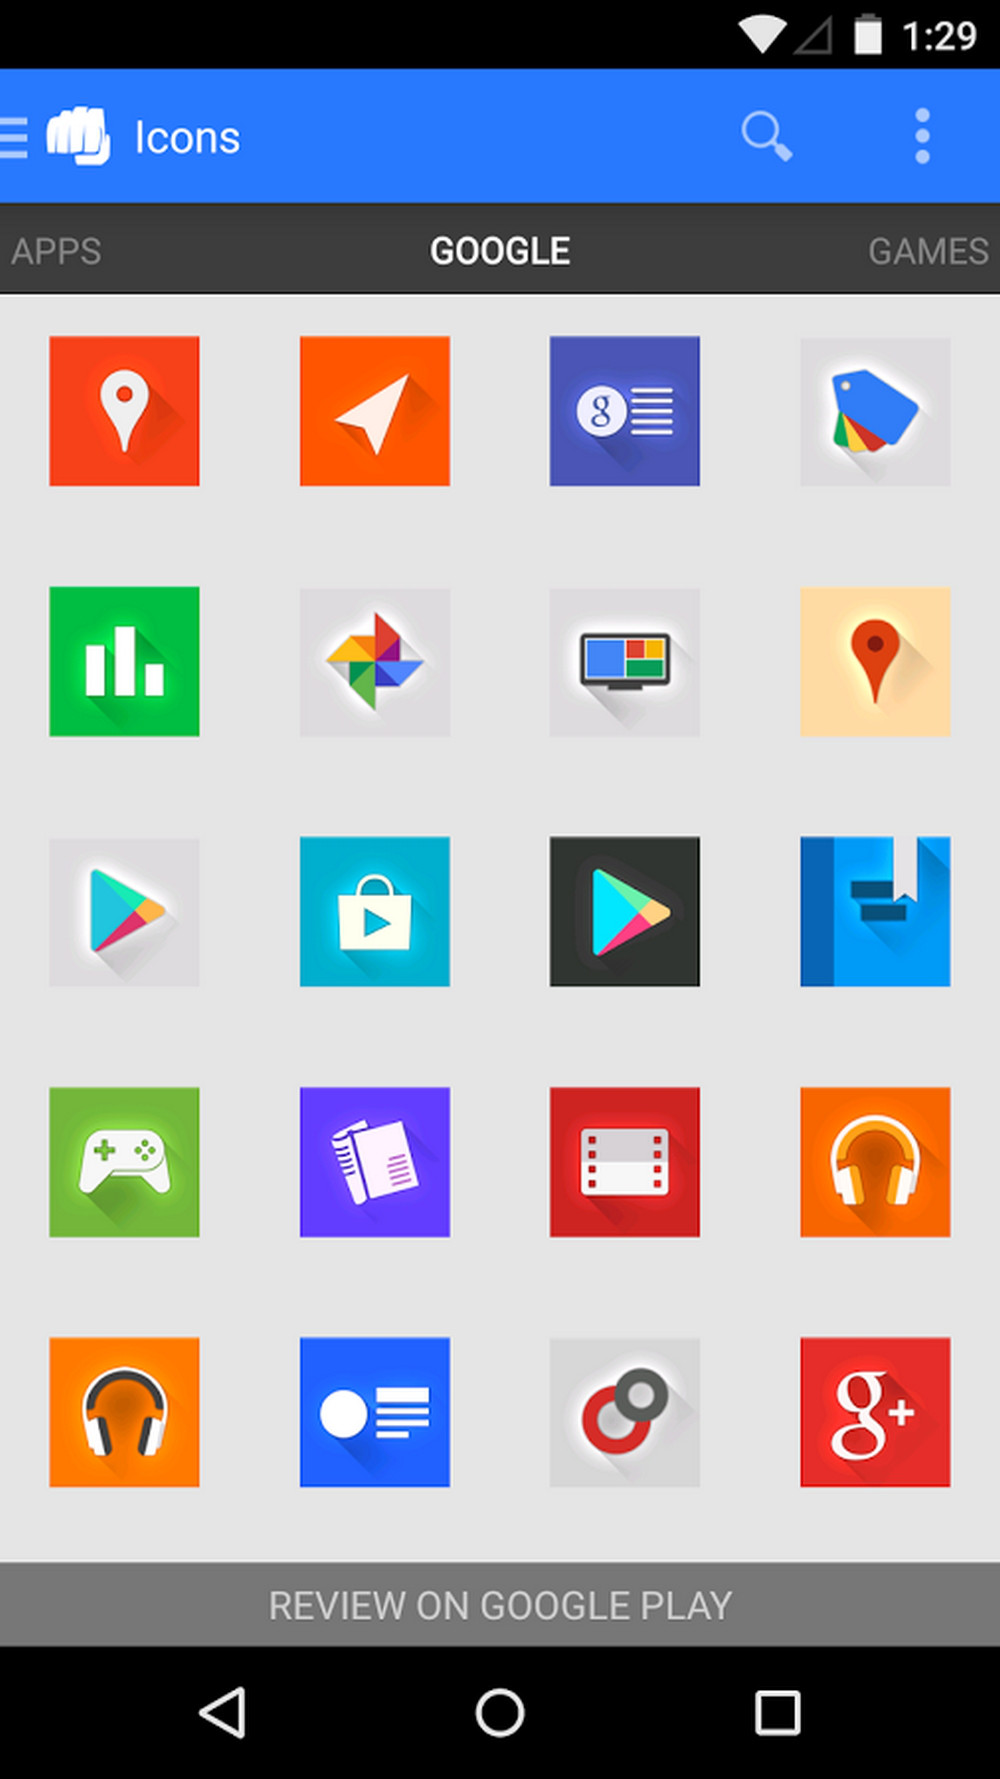 Best Android Icon Packs